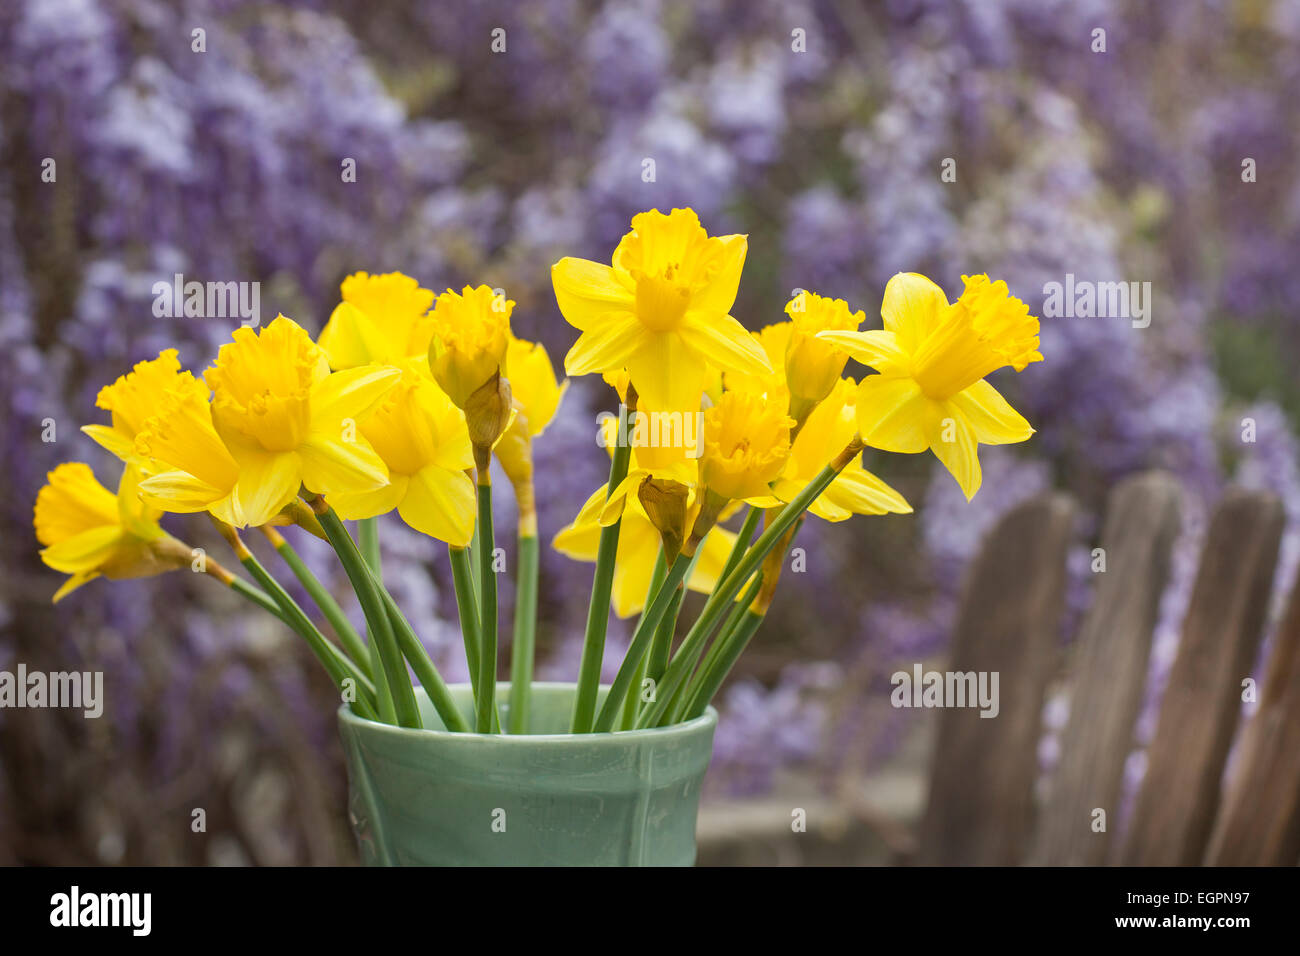 Daffodil flowers in vase outside Stock Photo